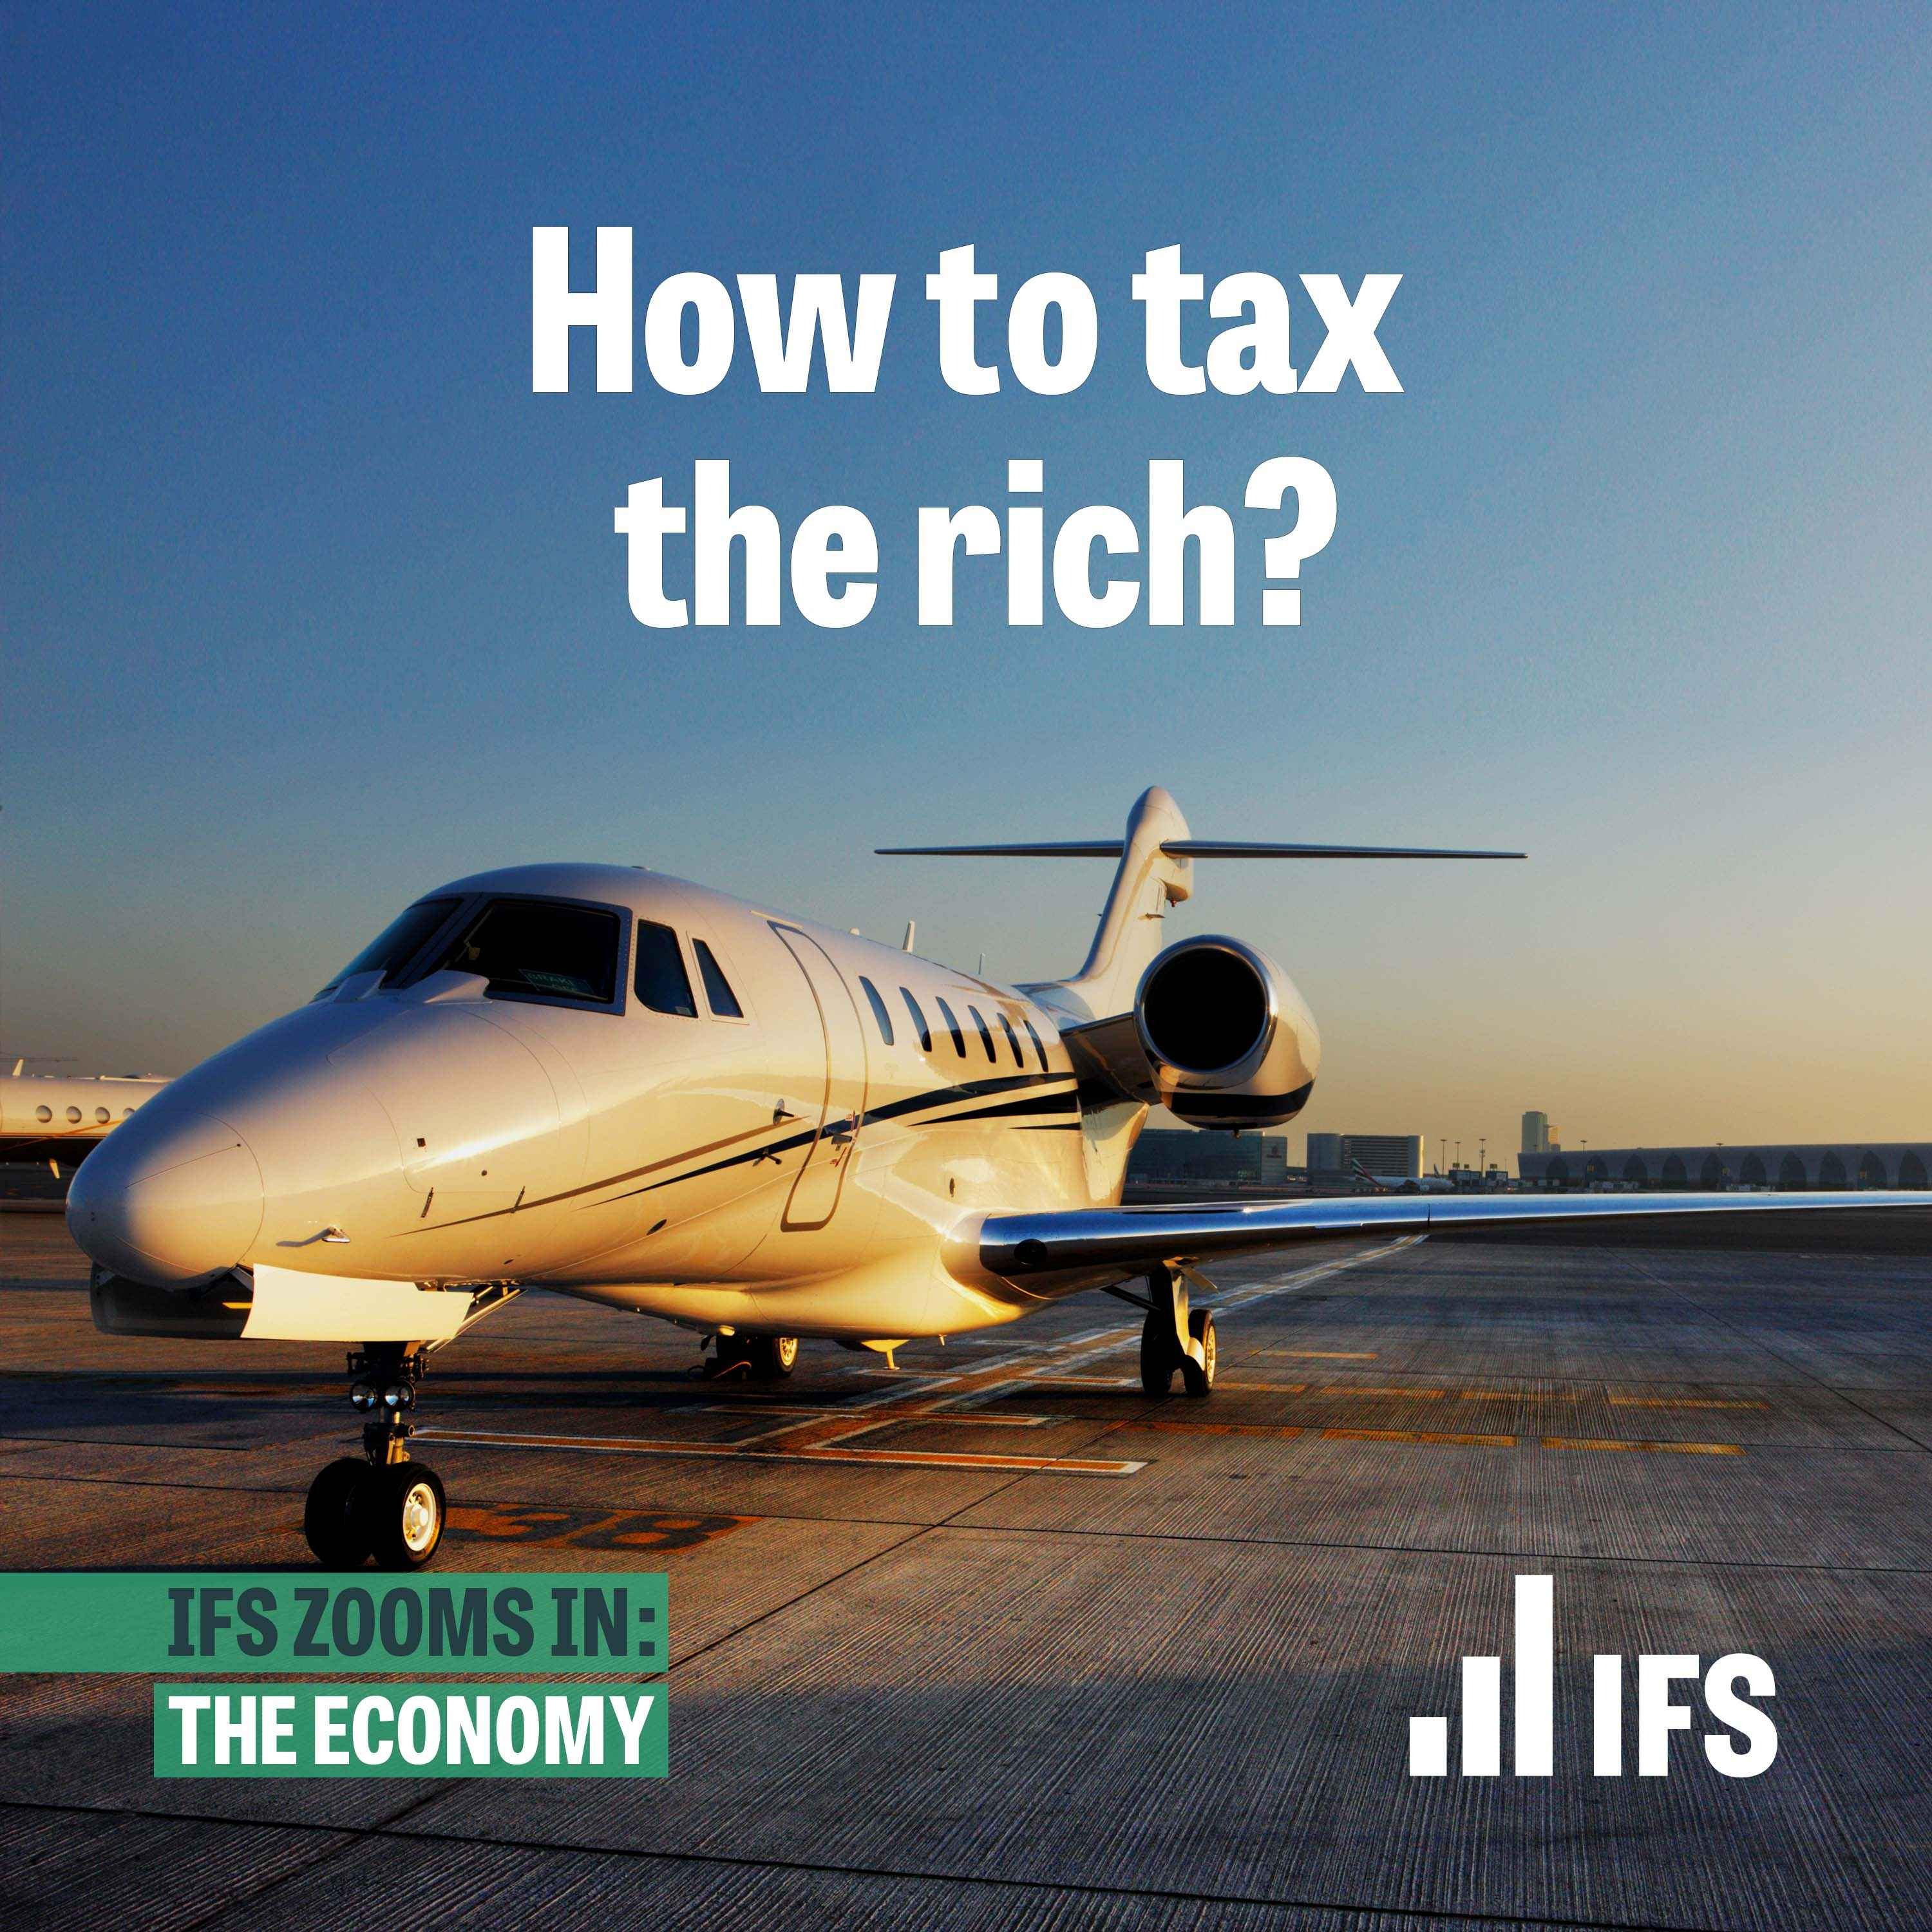 How to tax the rich?